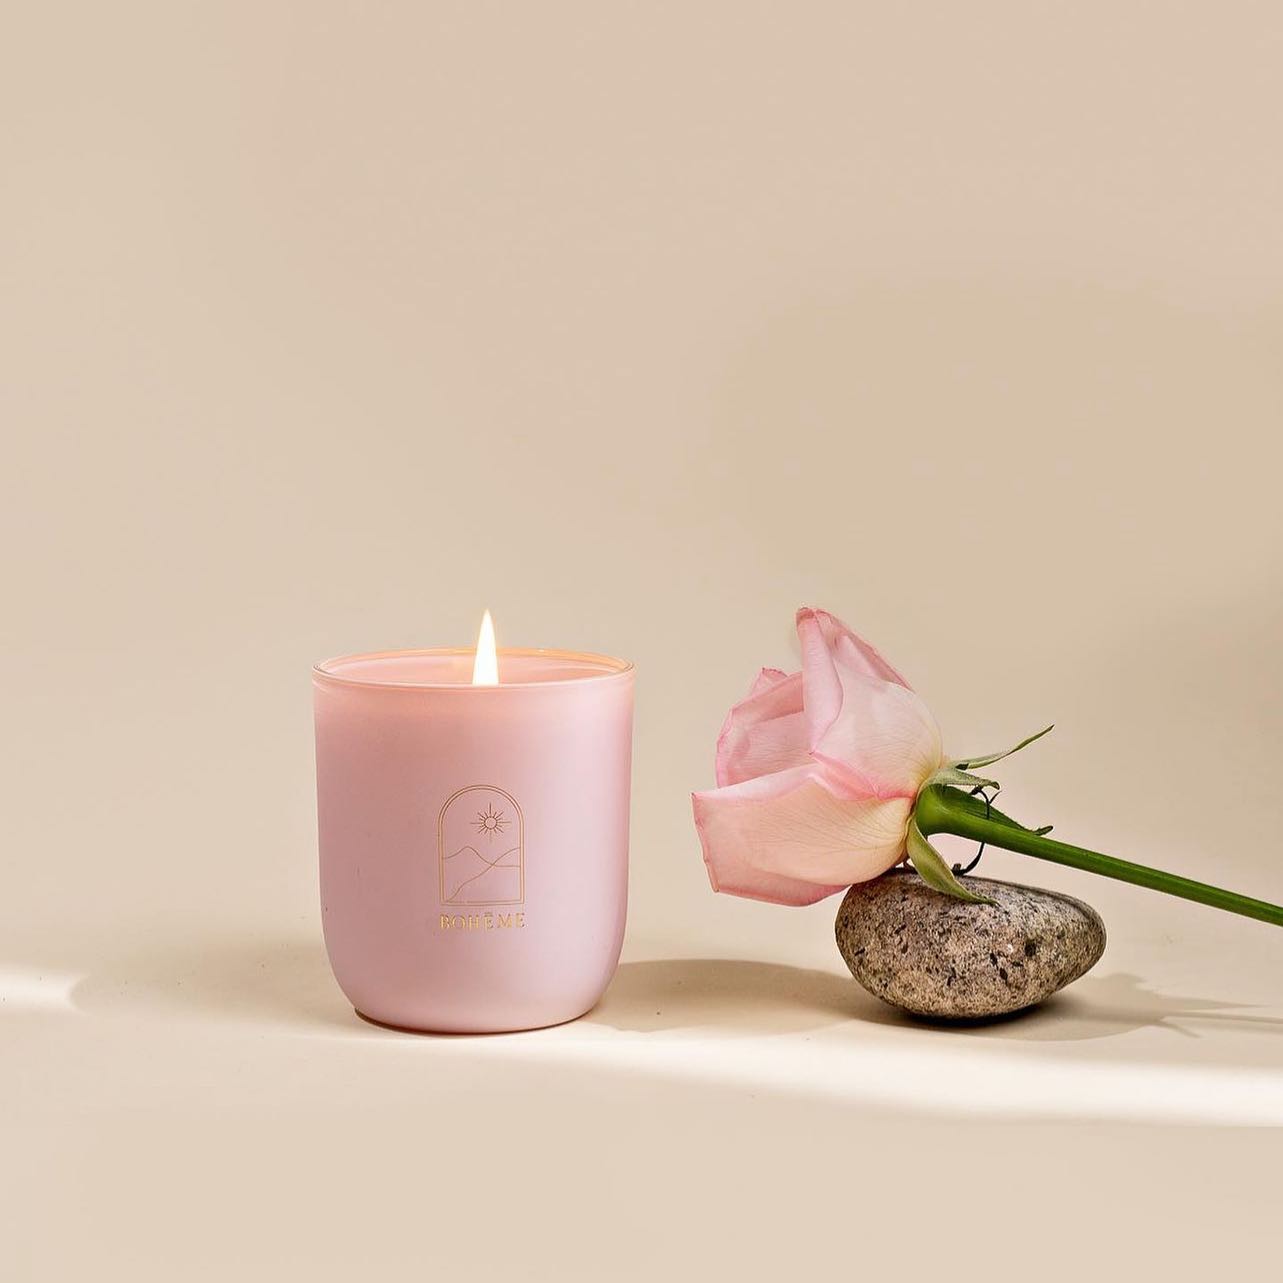 Boheme Notting Hill Scented Candle - Osmology Scented Candles & Home Fragrance